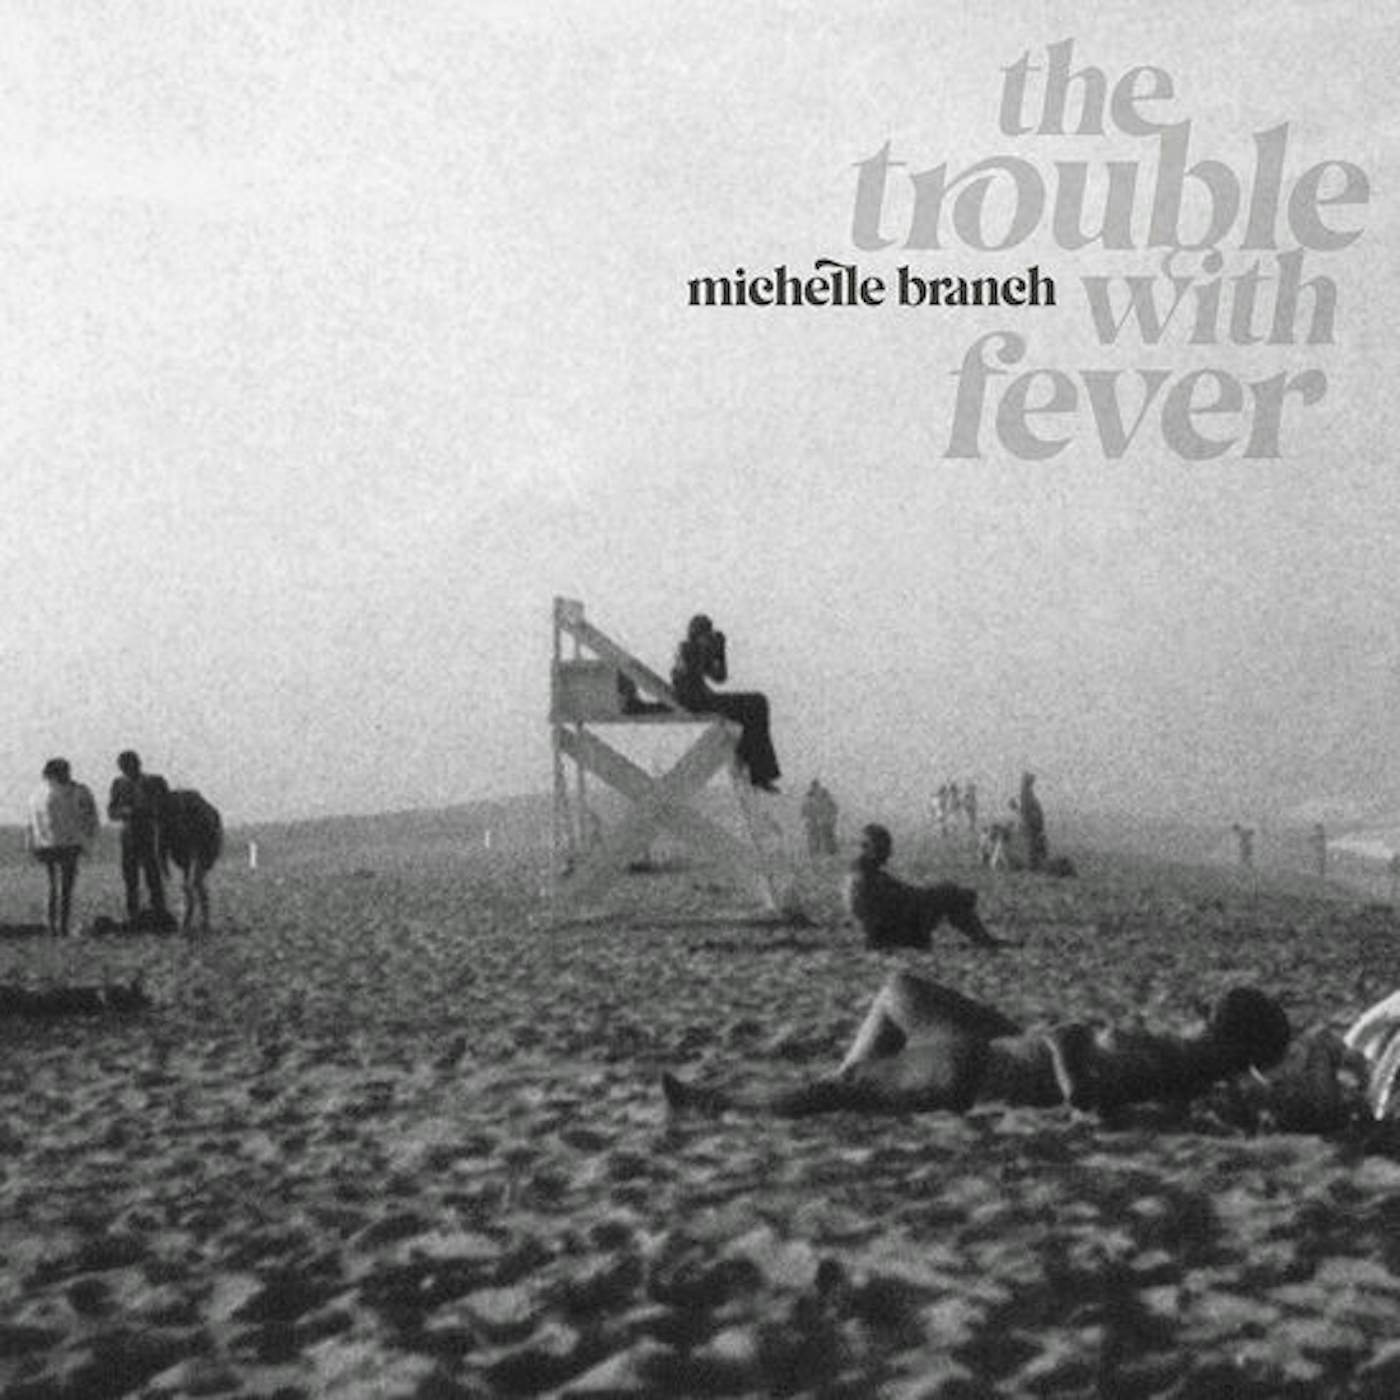 Michelle Branch The Trouble With Fever vinyl record